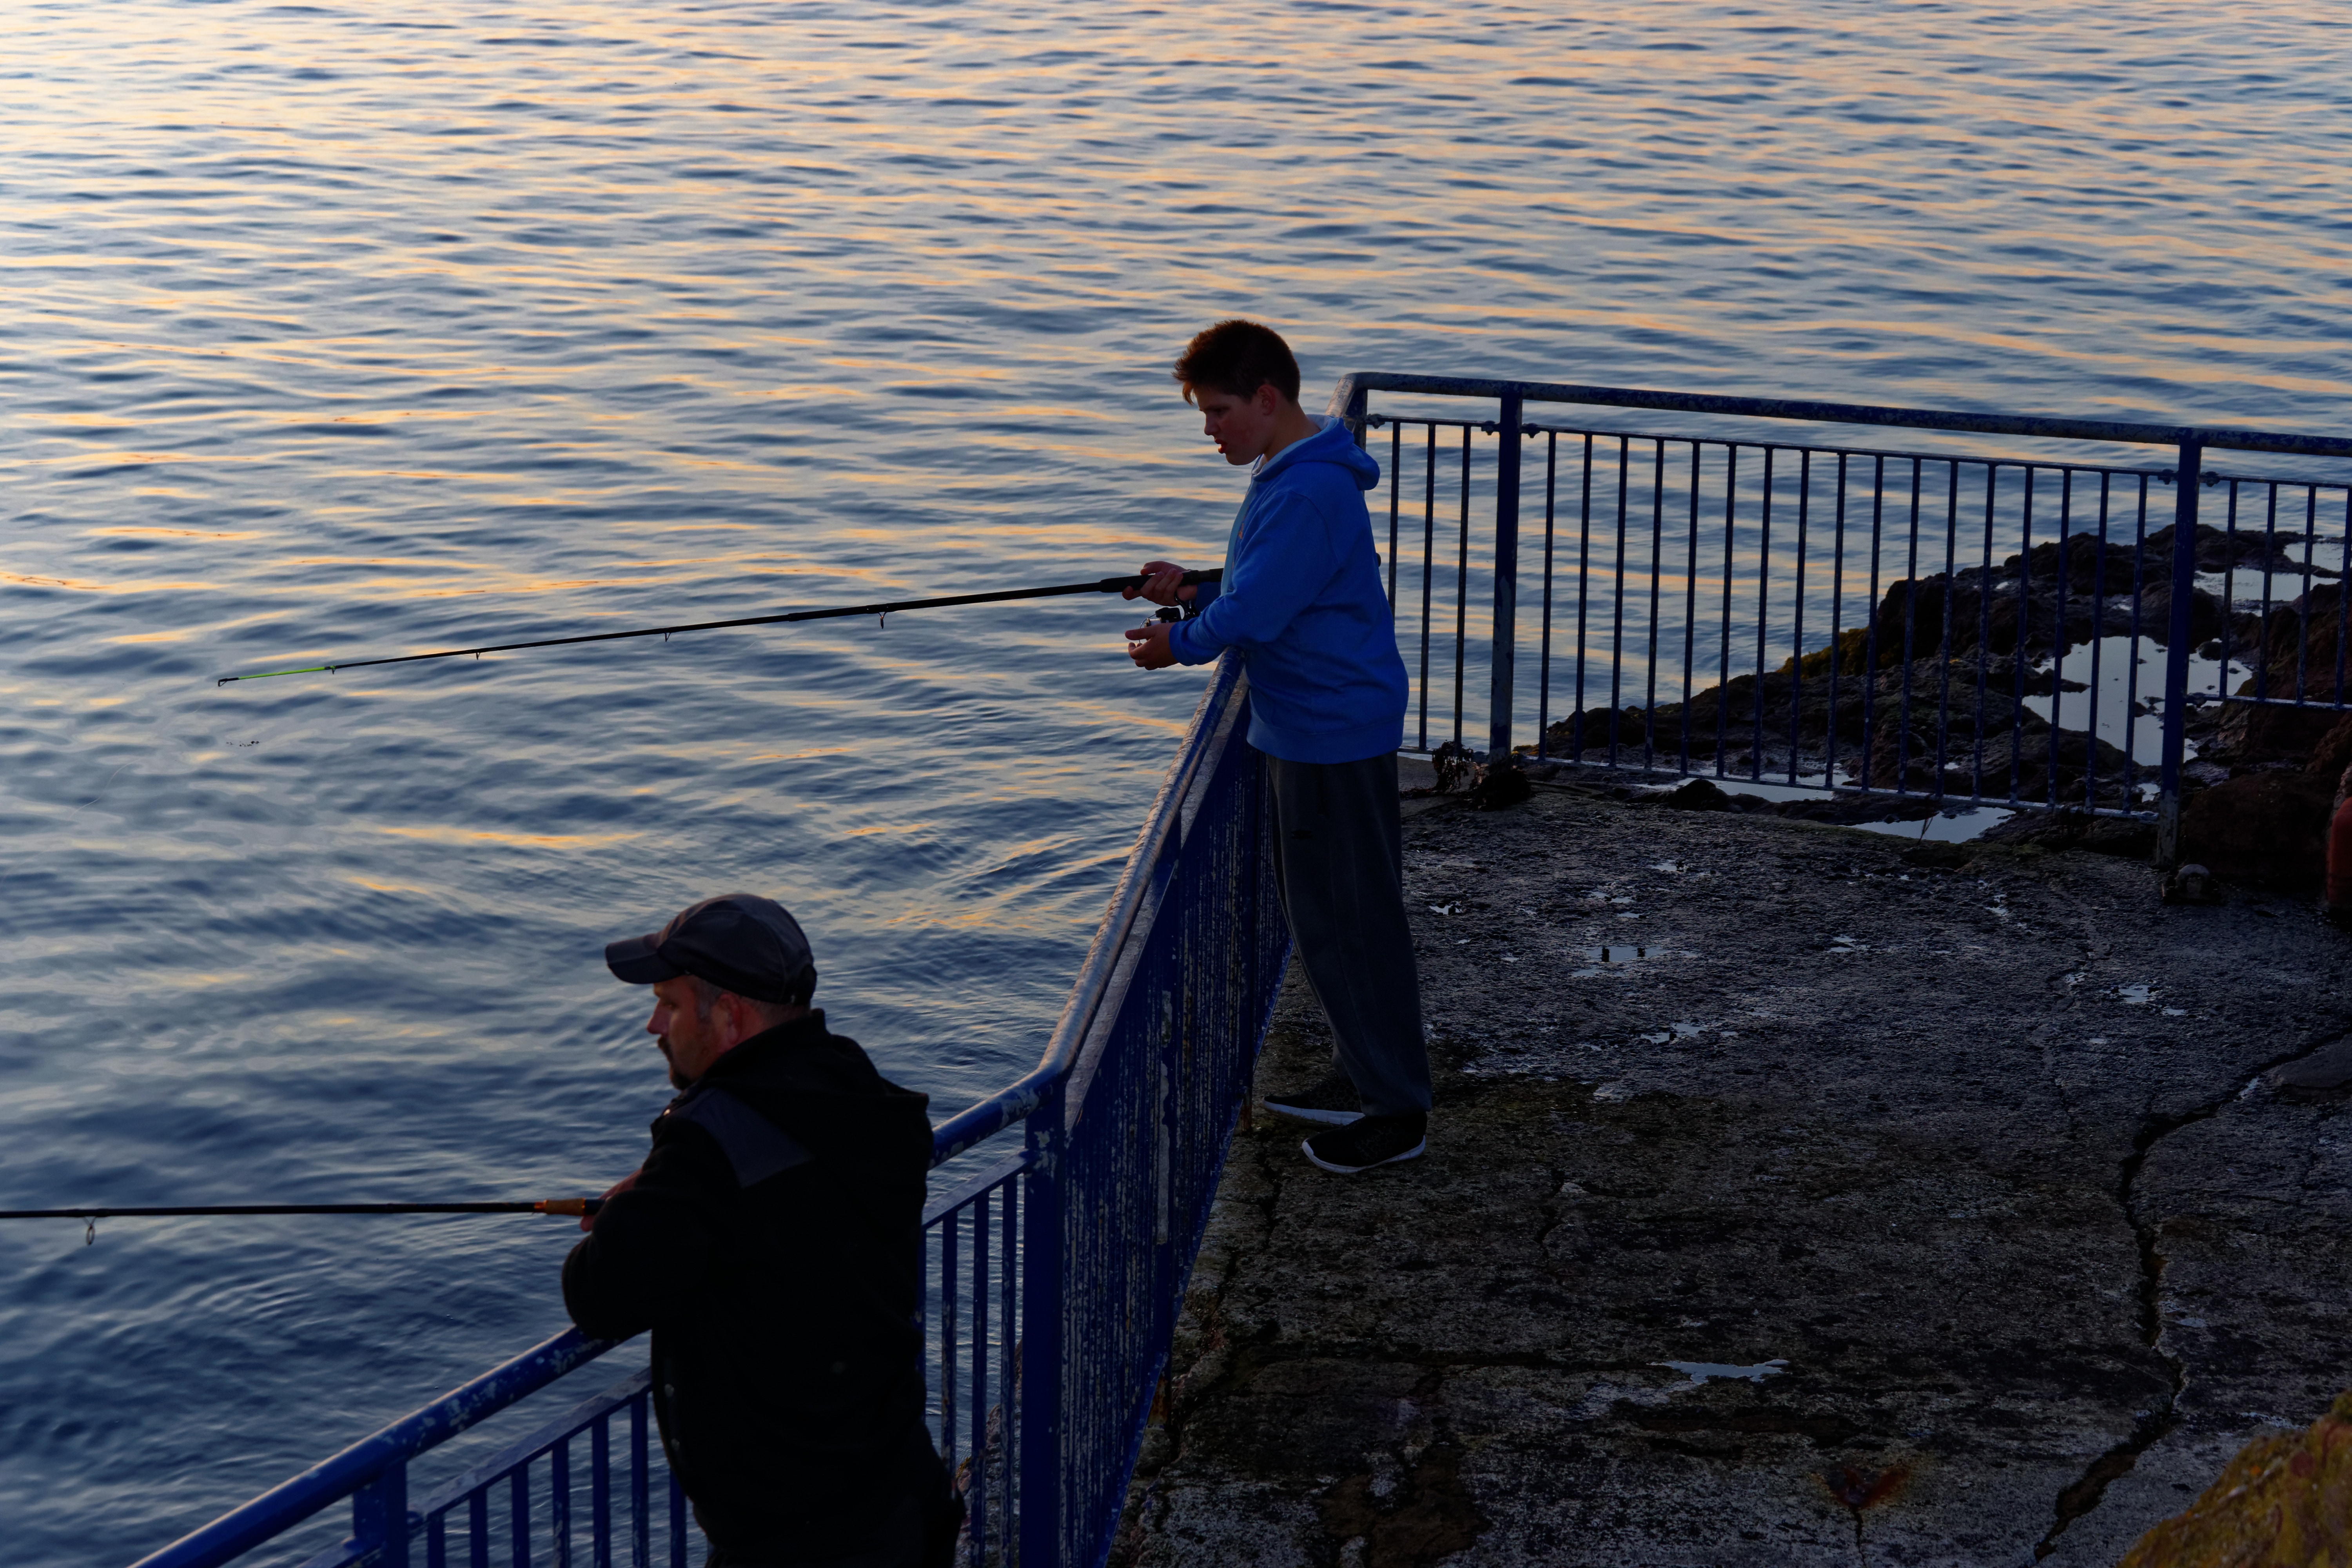 two man in hooded jacket fishing during daytime